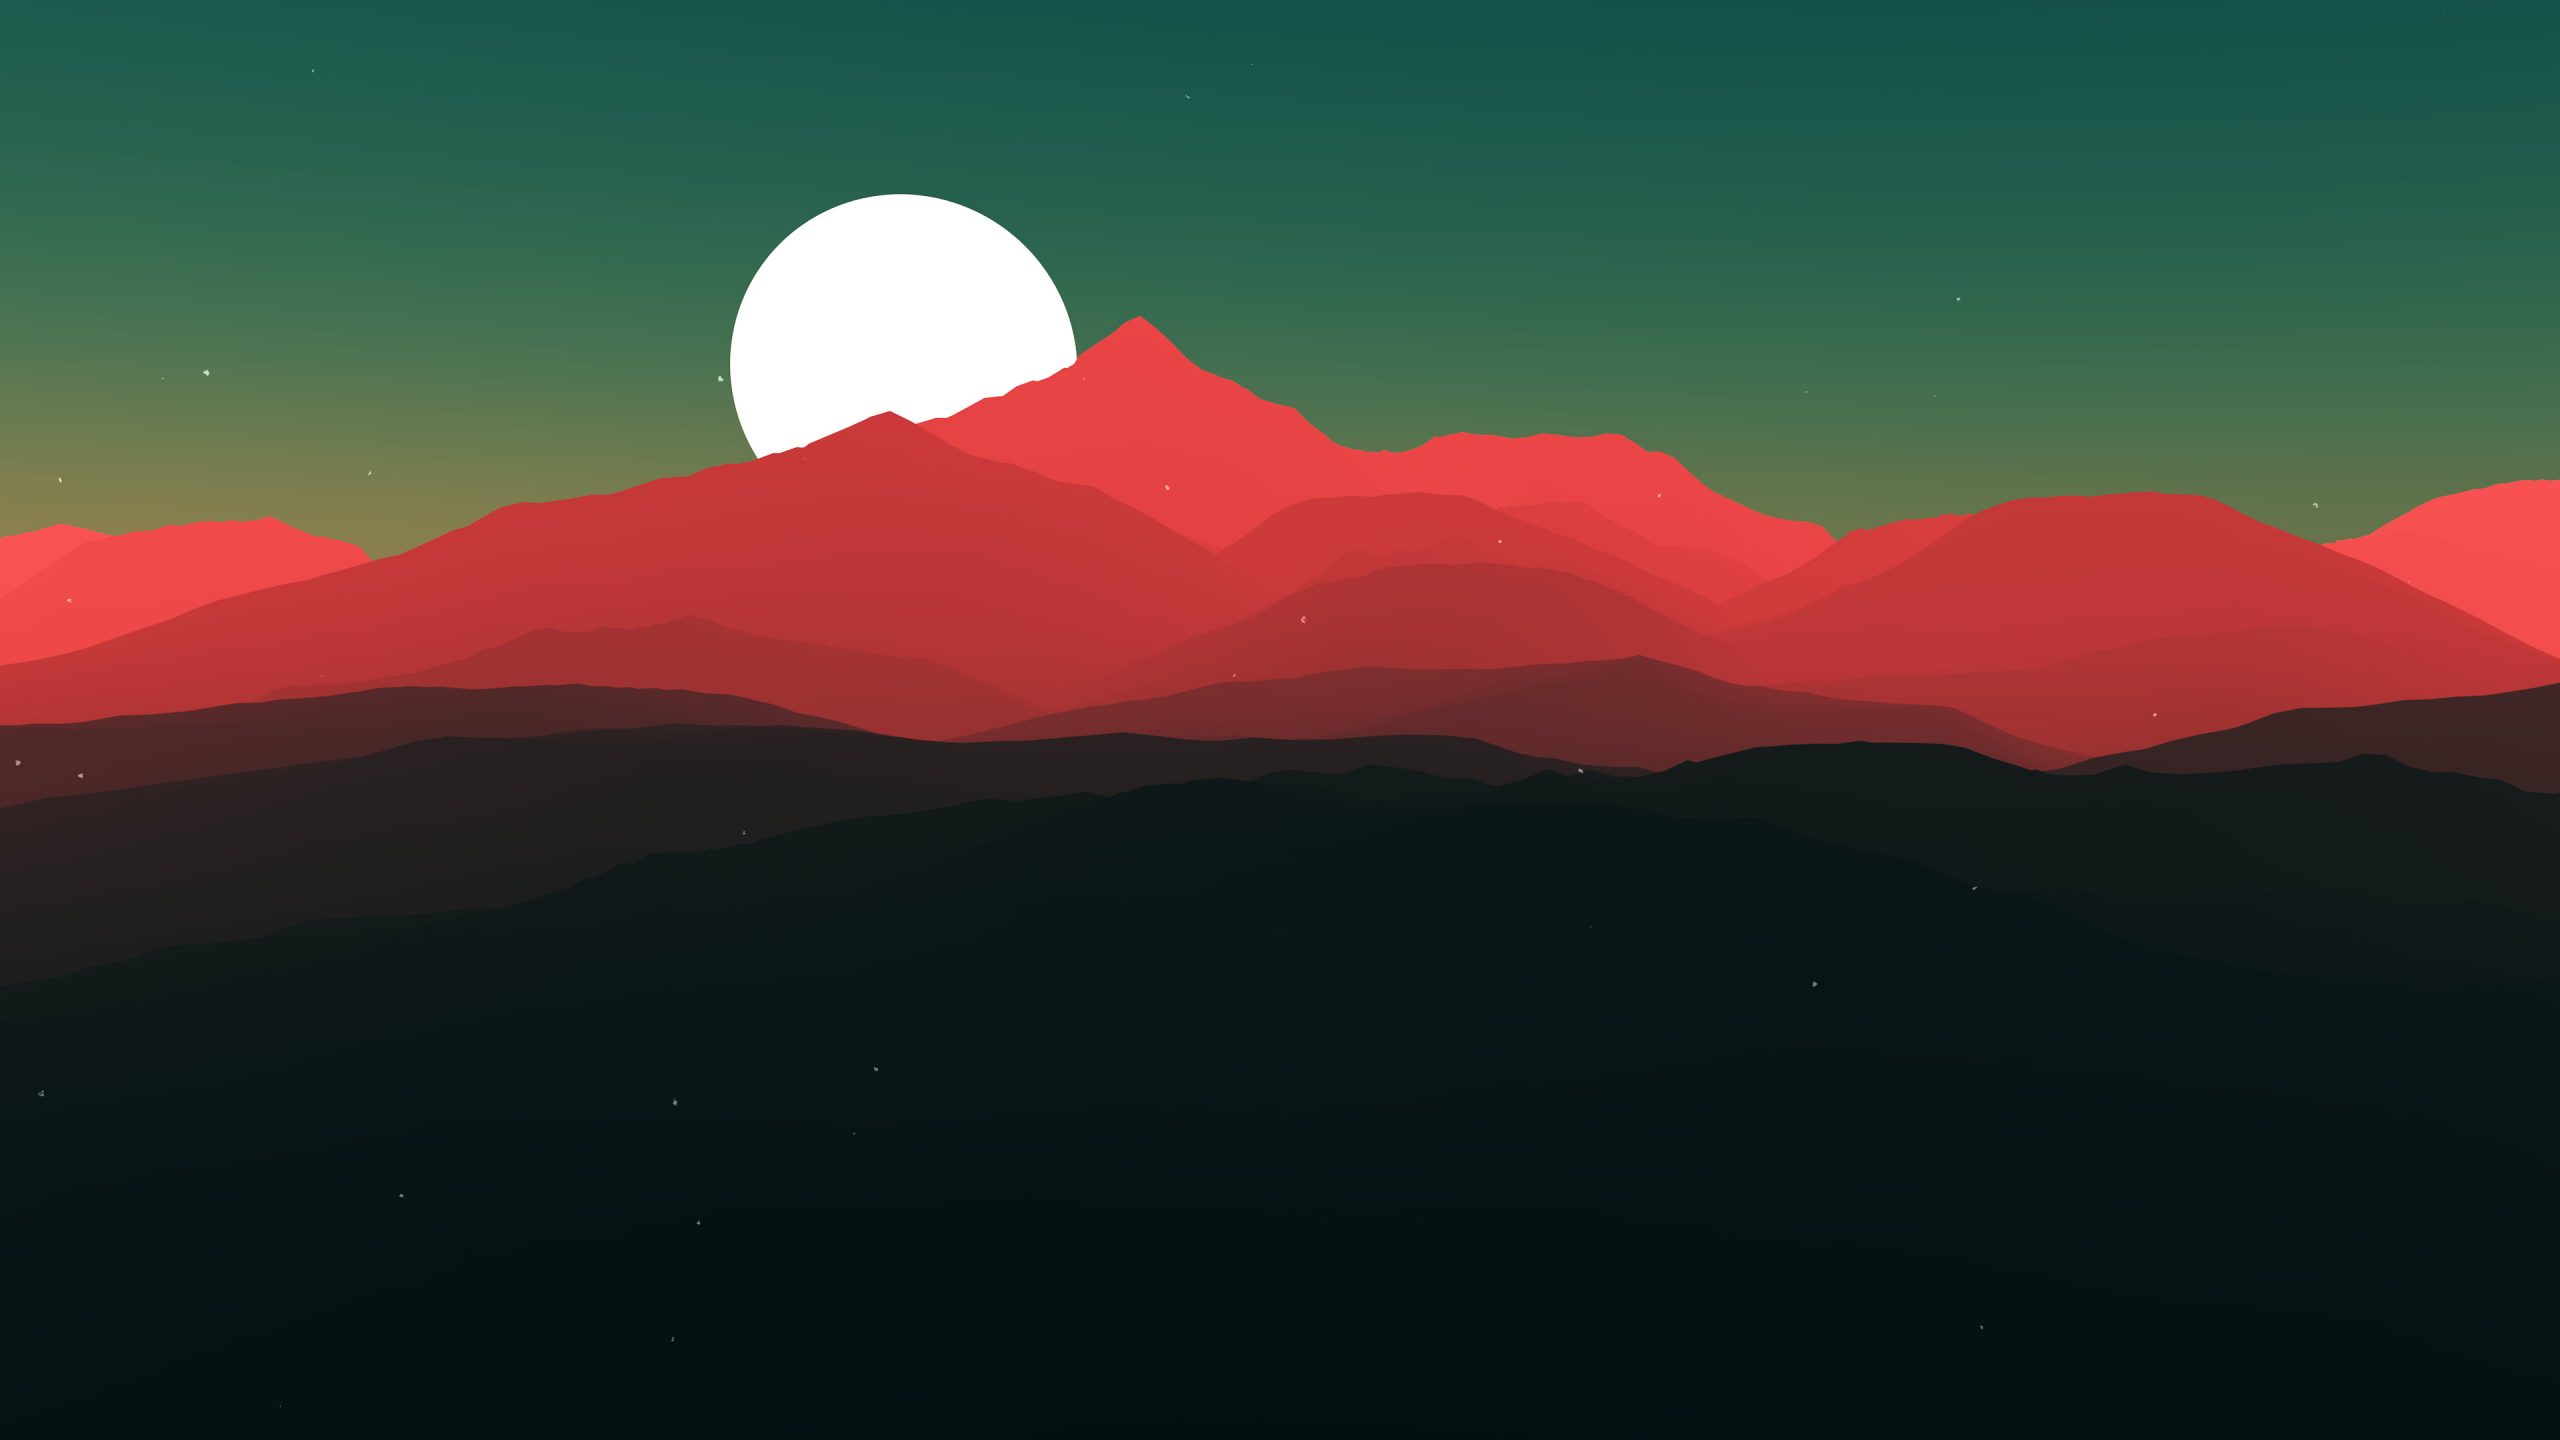 Red Mountains And Moon Digital Wallpaper, Red Mountain Illustration • Wallpaper For You